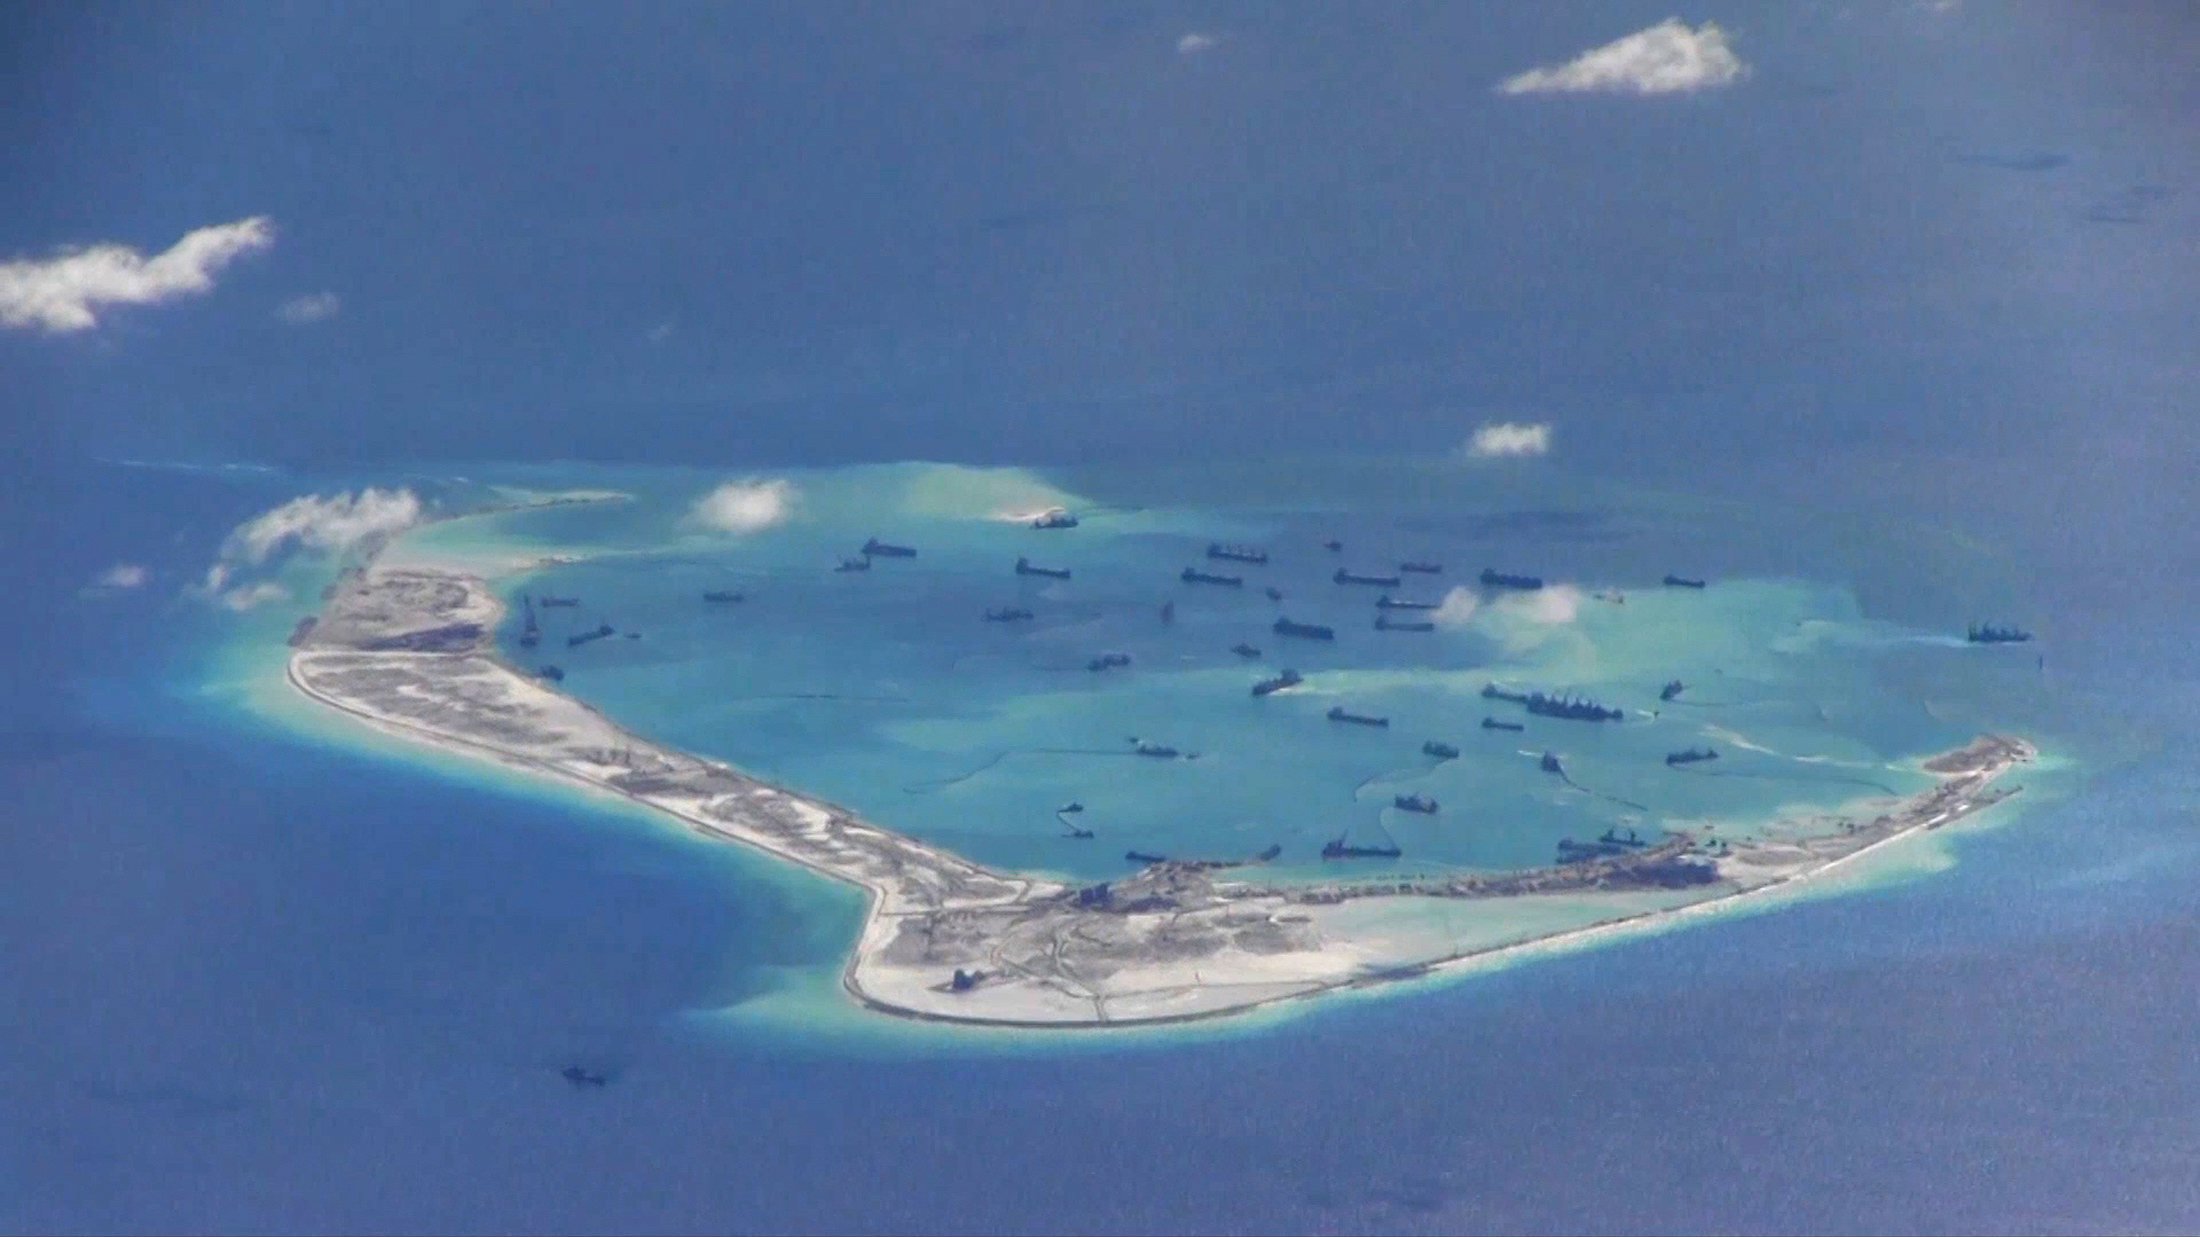 As World Watches Kim, China Quietly Builds South China Sea Clout